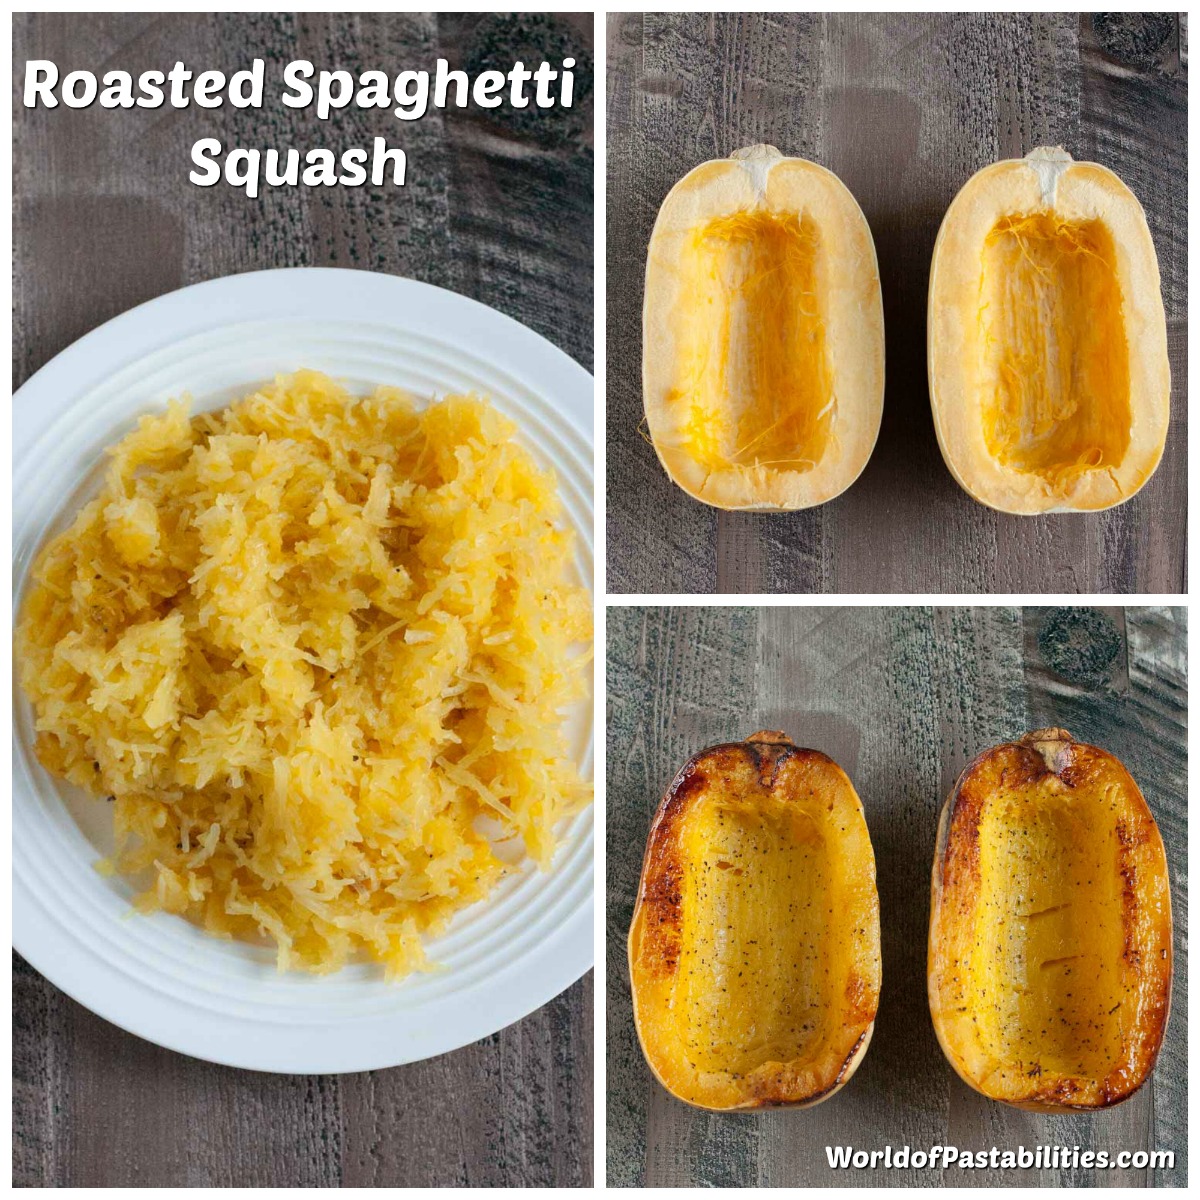 Roasted Spaghetti Squash | WorldofPastabilities.com | Easy to roast and delicious in flavor - healthy and tastes like pasta!